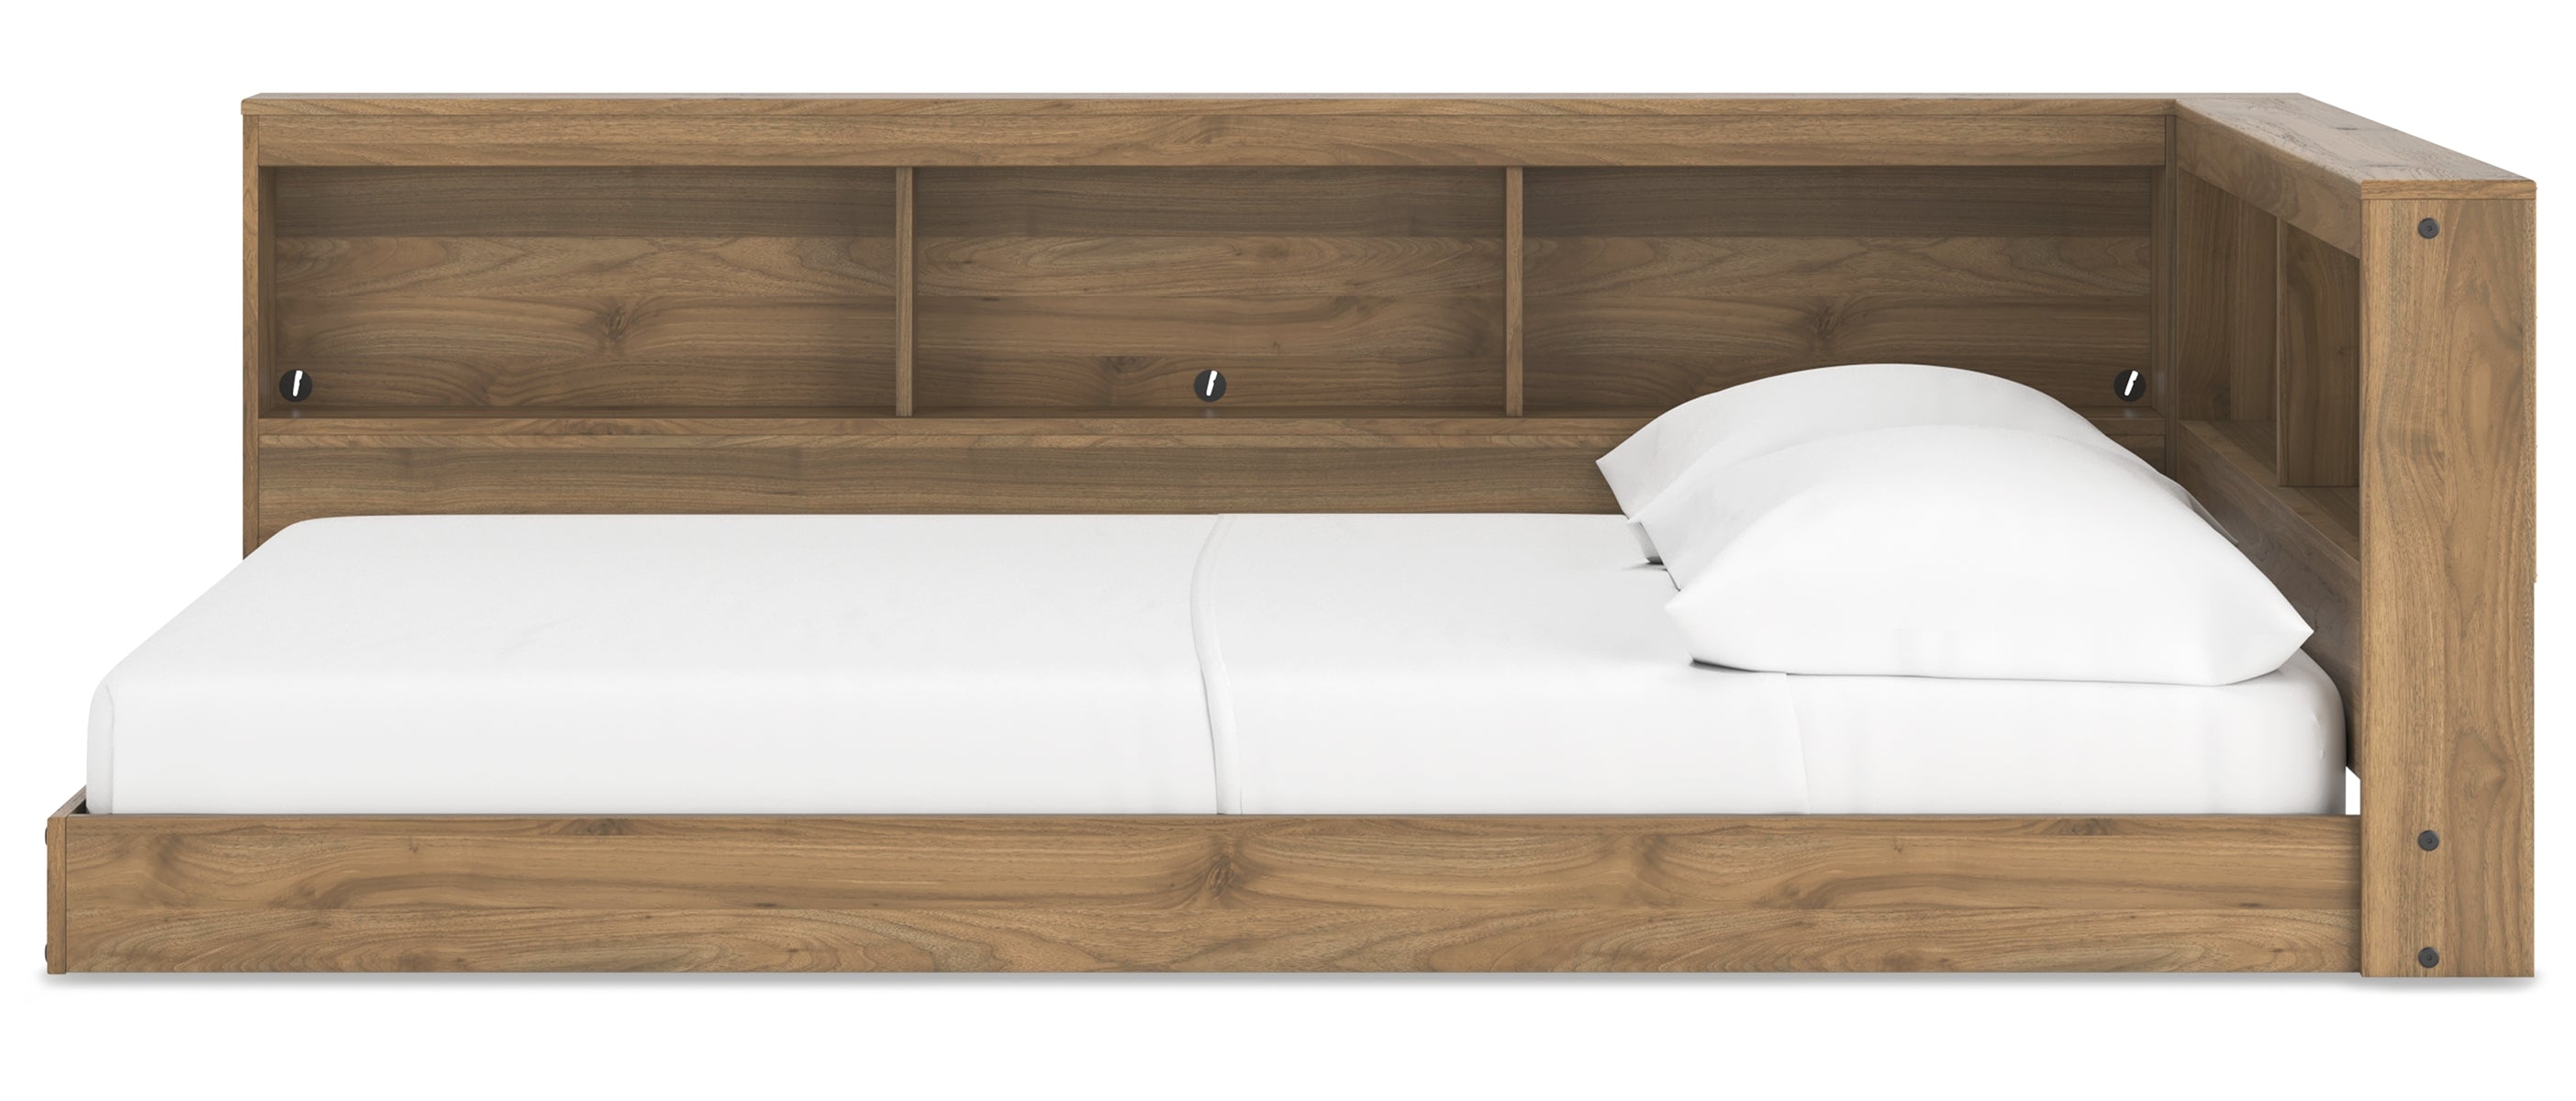 Deanlow Full Bookcase Storage Bed